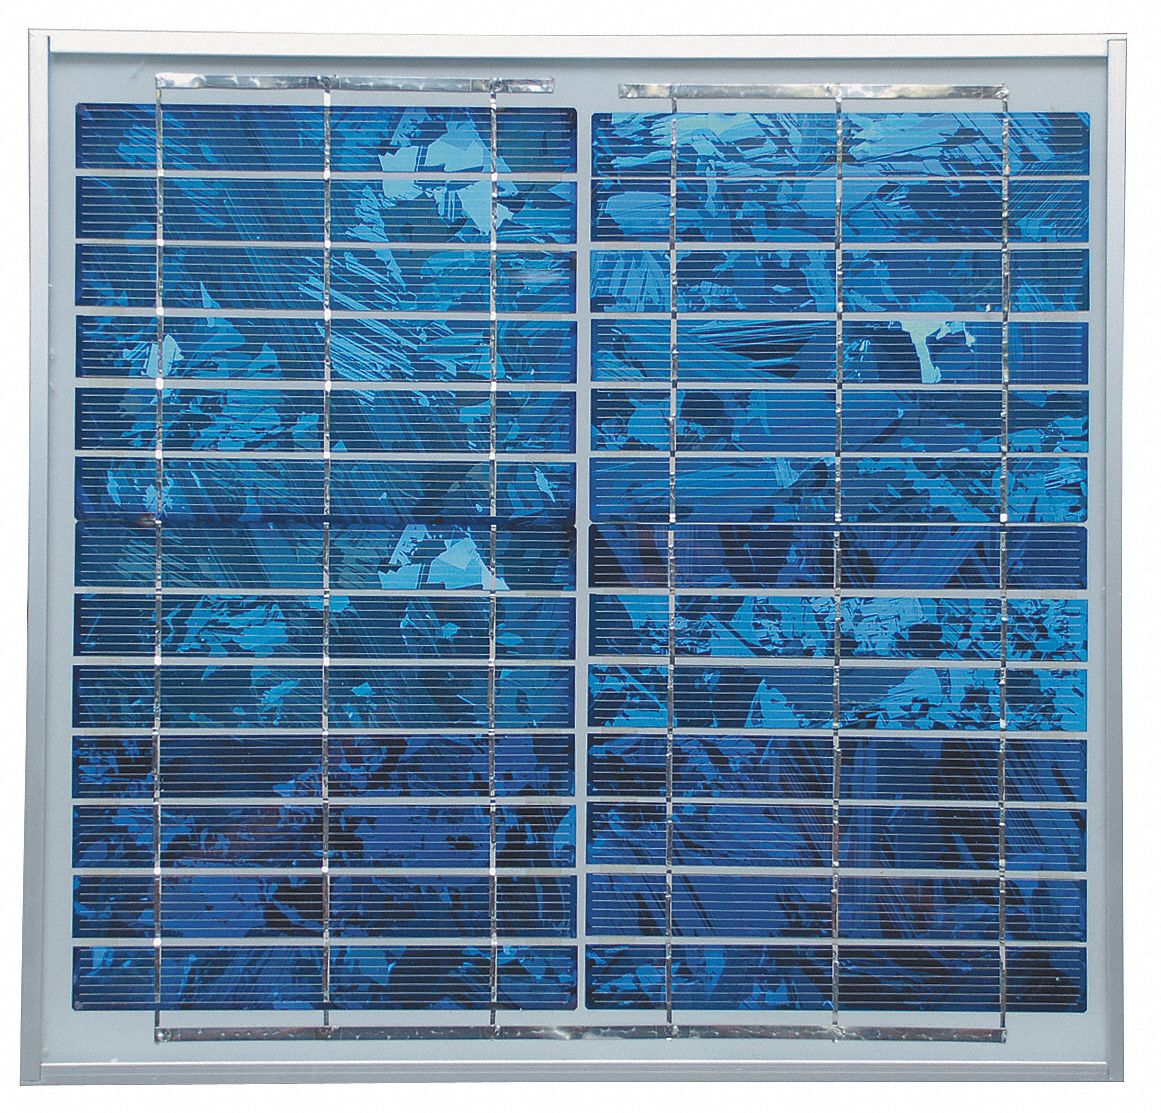 Replacement Solar Panel: 4YCK9/4YCL1/4YCL2 and 4YCL3